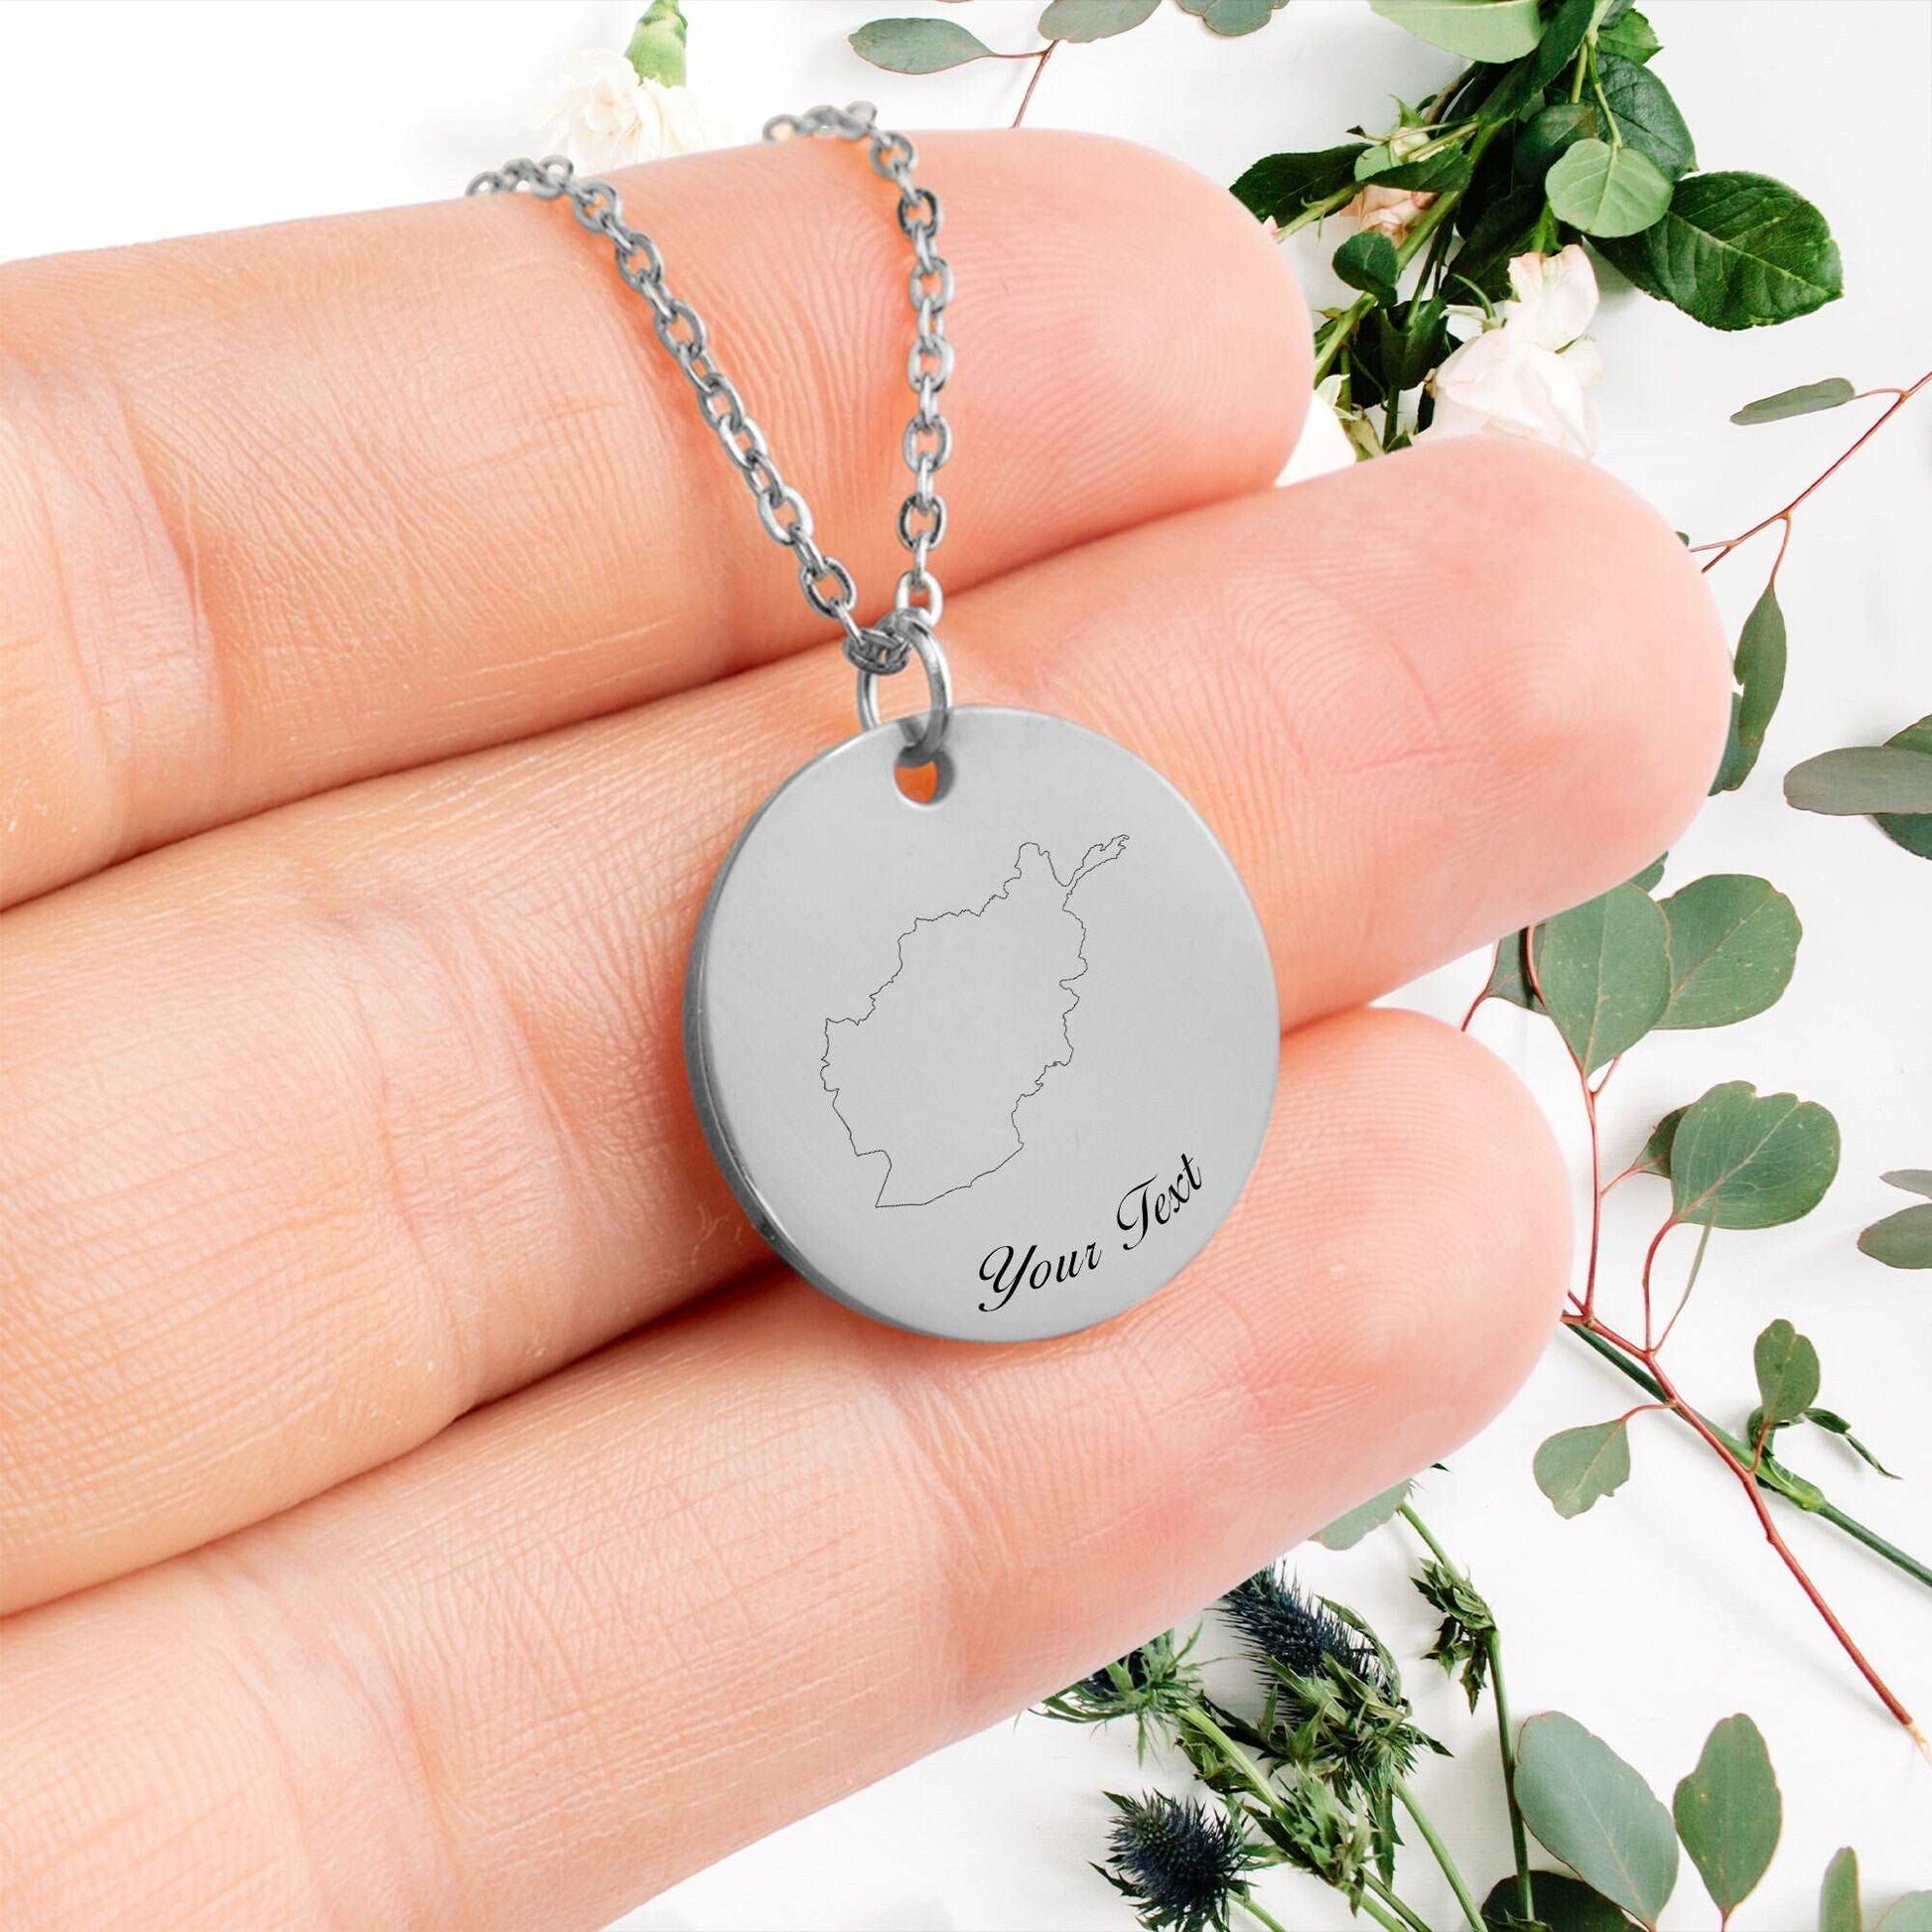 Afghanistan Country Map Necklace, Your Name Necklace, Minimalist Necklace, Personalized Gift, Silver Necklace, Gift For Him Her